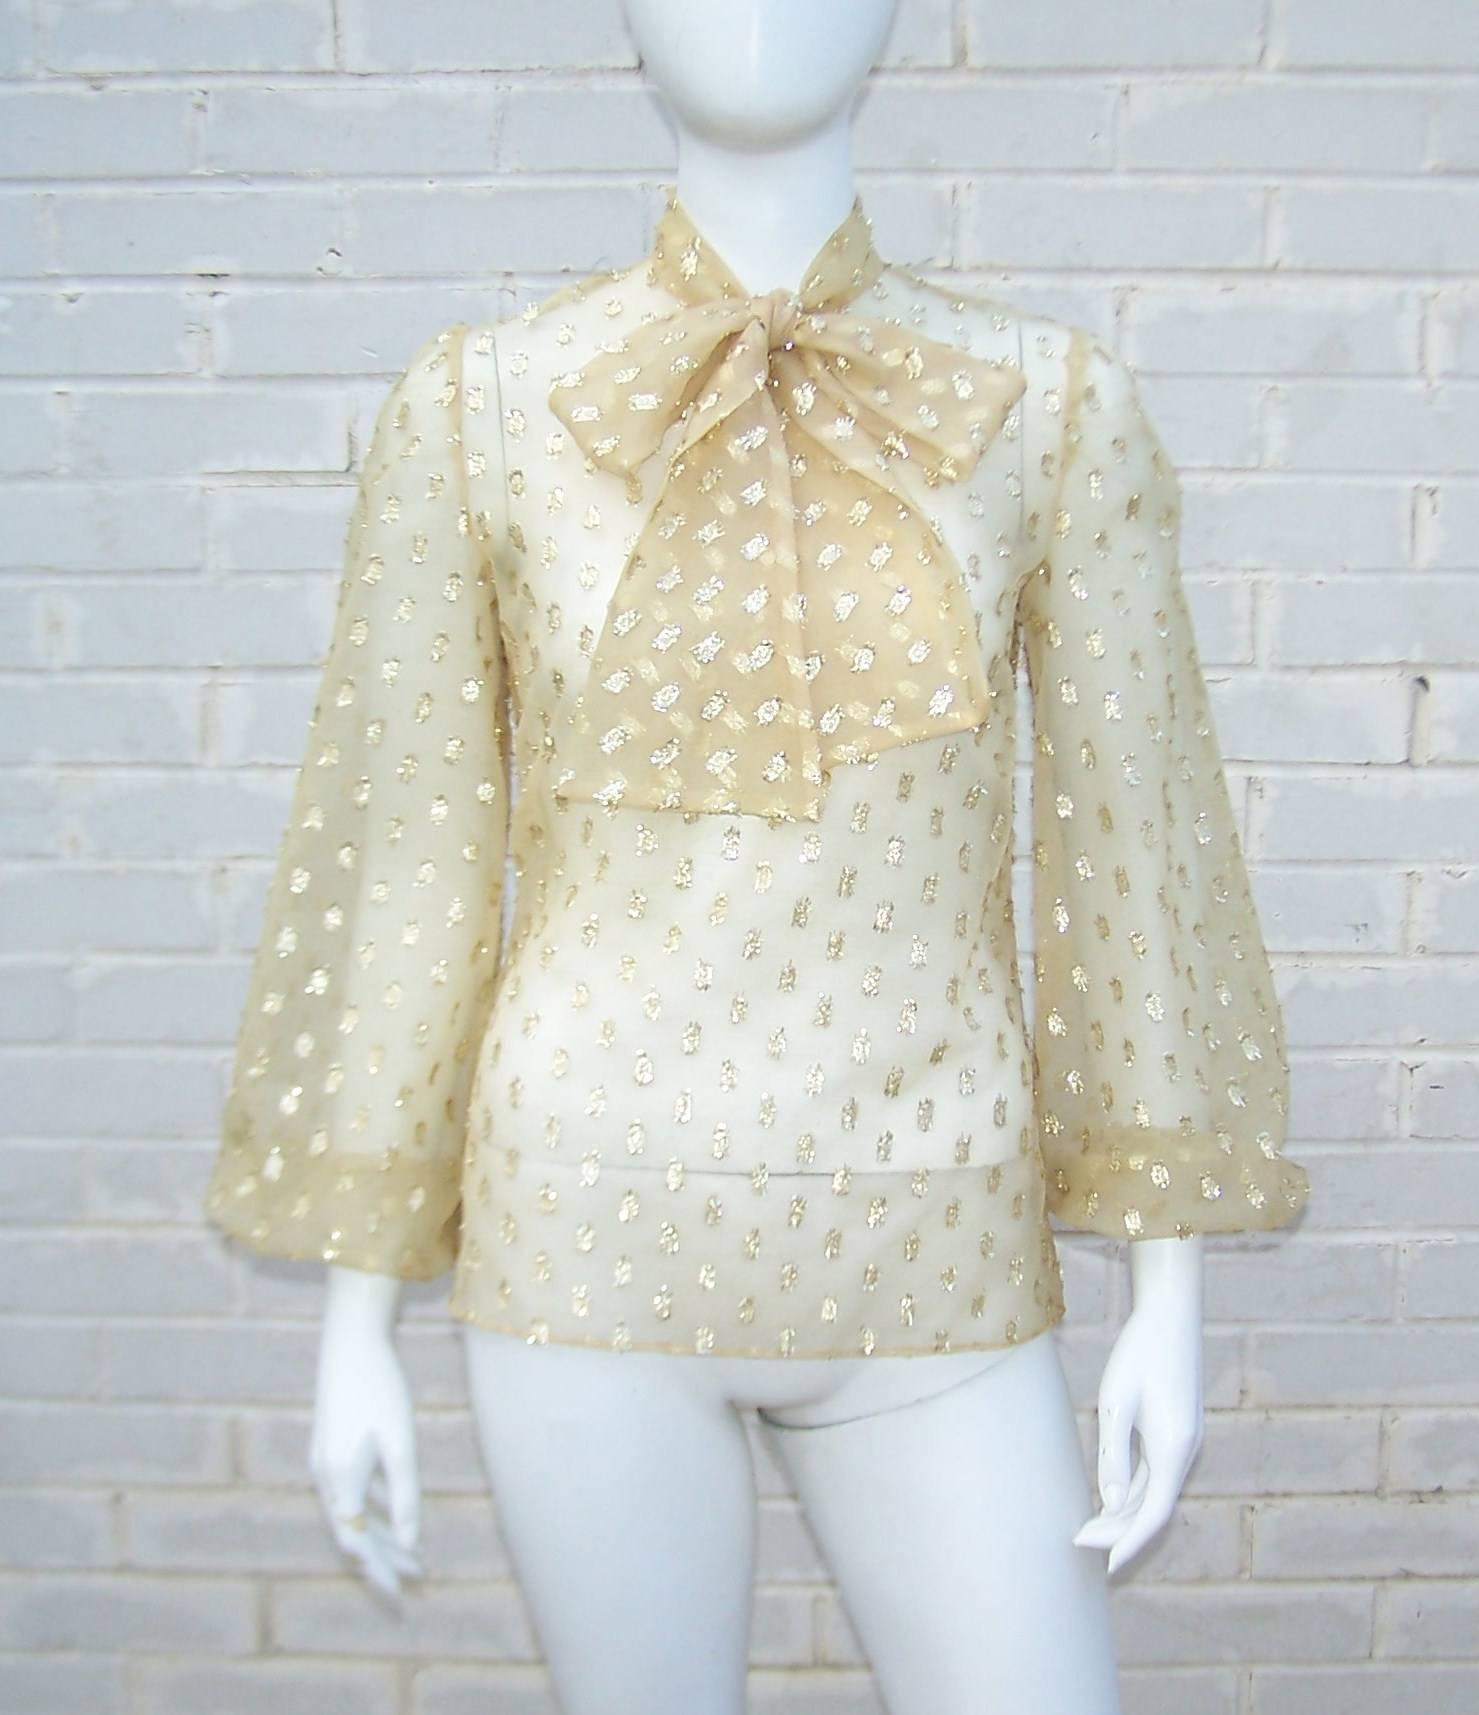 Add a hint of golden glam to any outfit with this sheer lame dotted blouse.  The blouse zips and hooks at the back with a built-in stock tie which can be worn as a bow or double wrapped like a neck scarf.  The balloon sleeves are elasticized at the